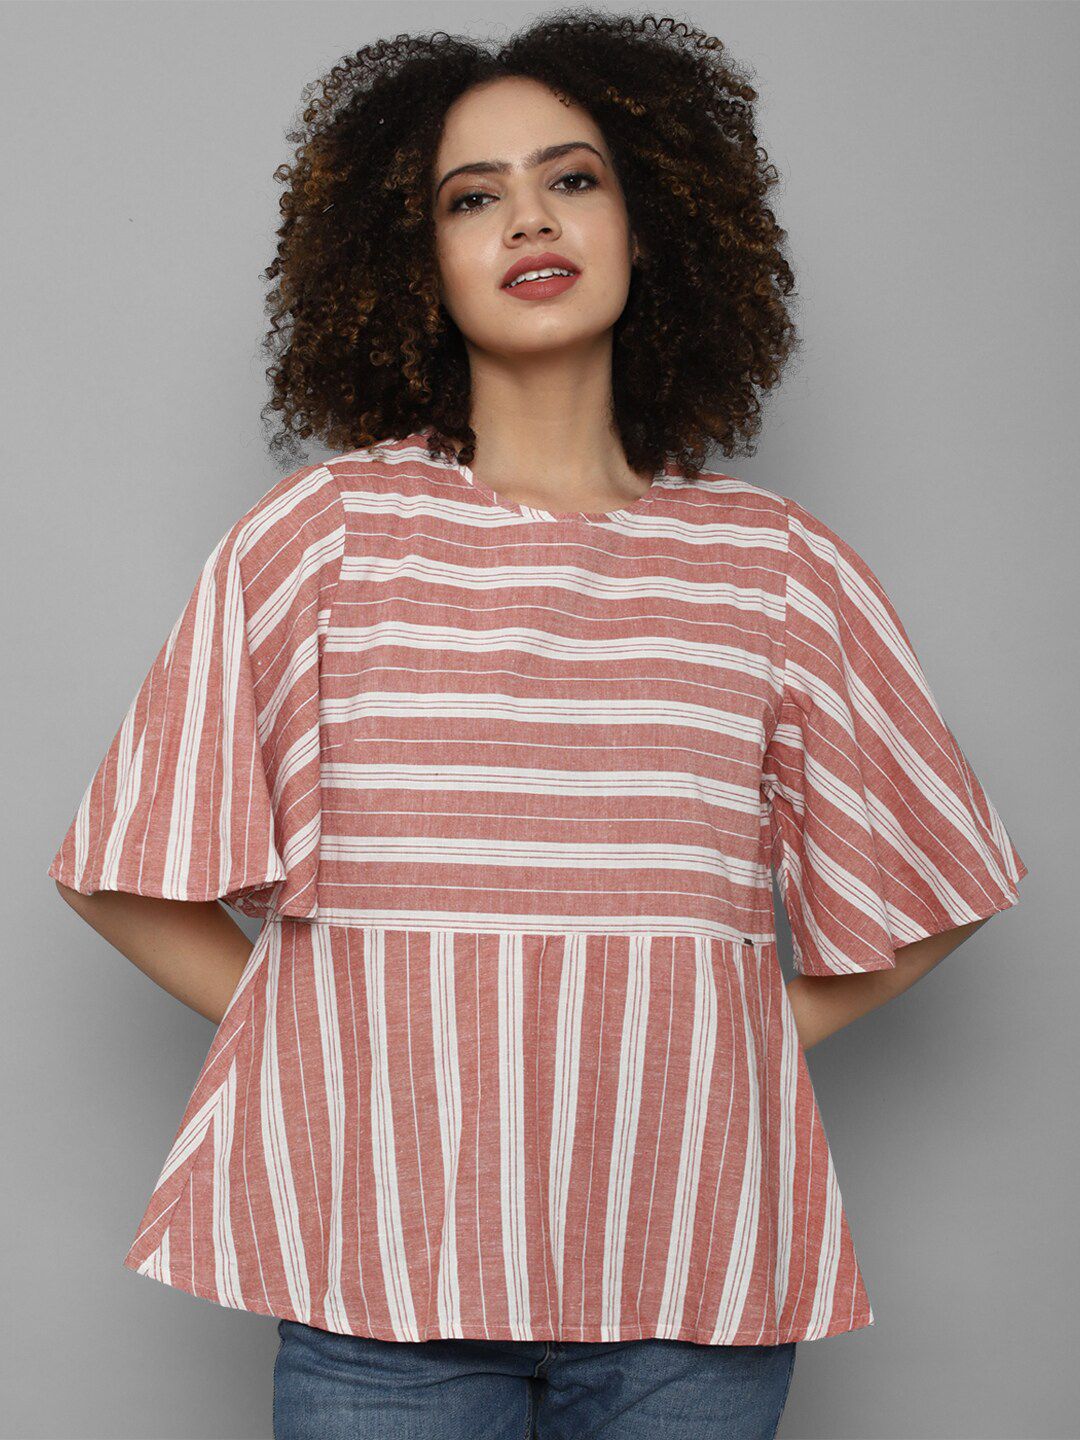 Allen Solly Woman Pink & White Striped Top Price in India